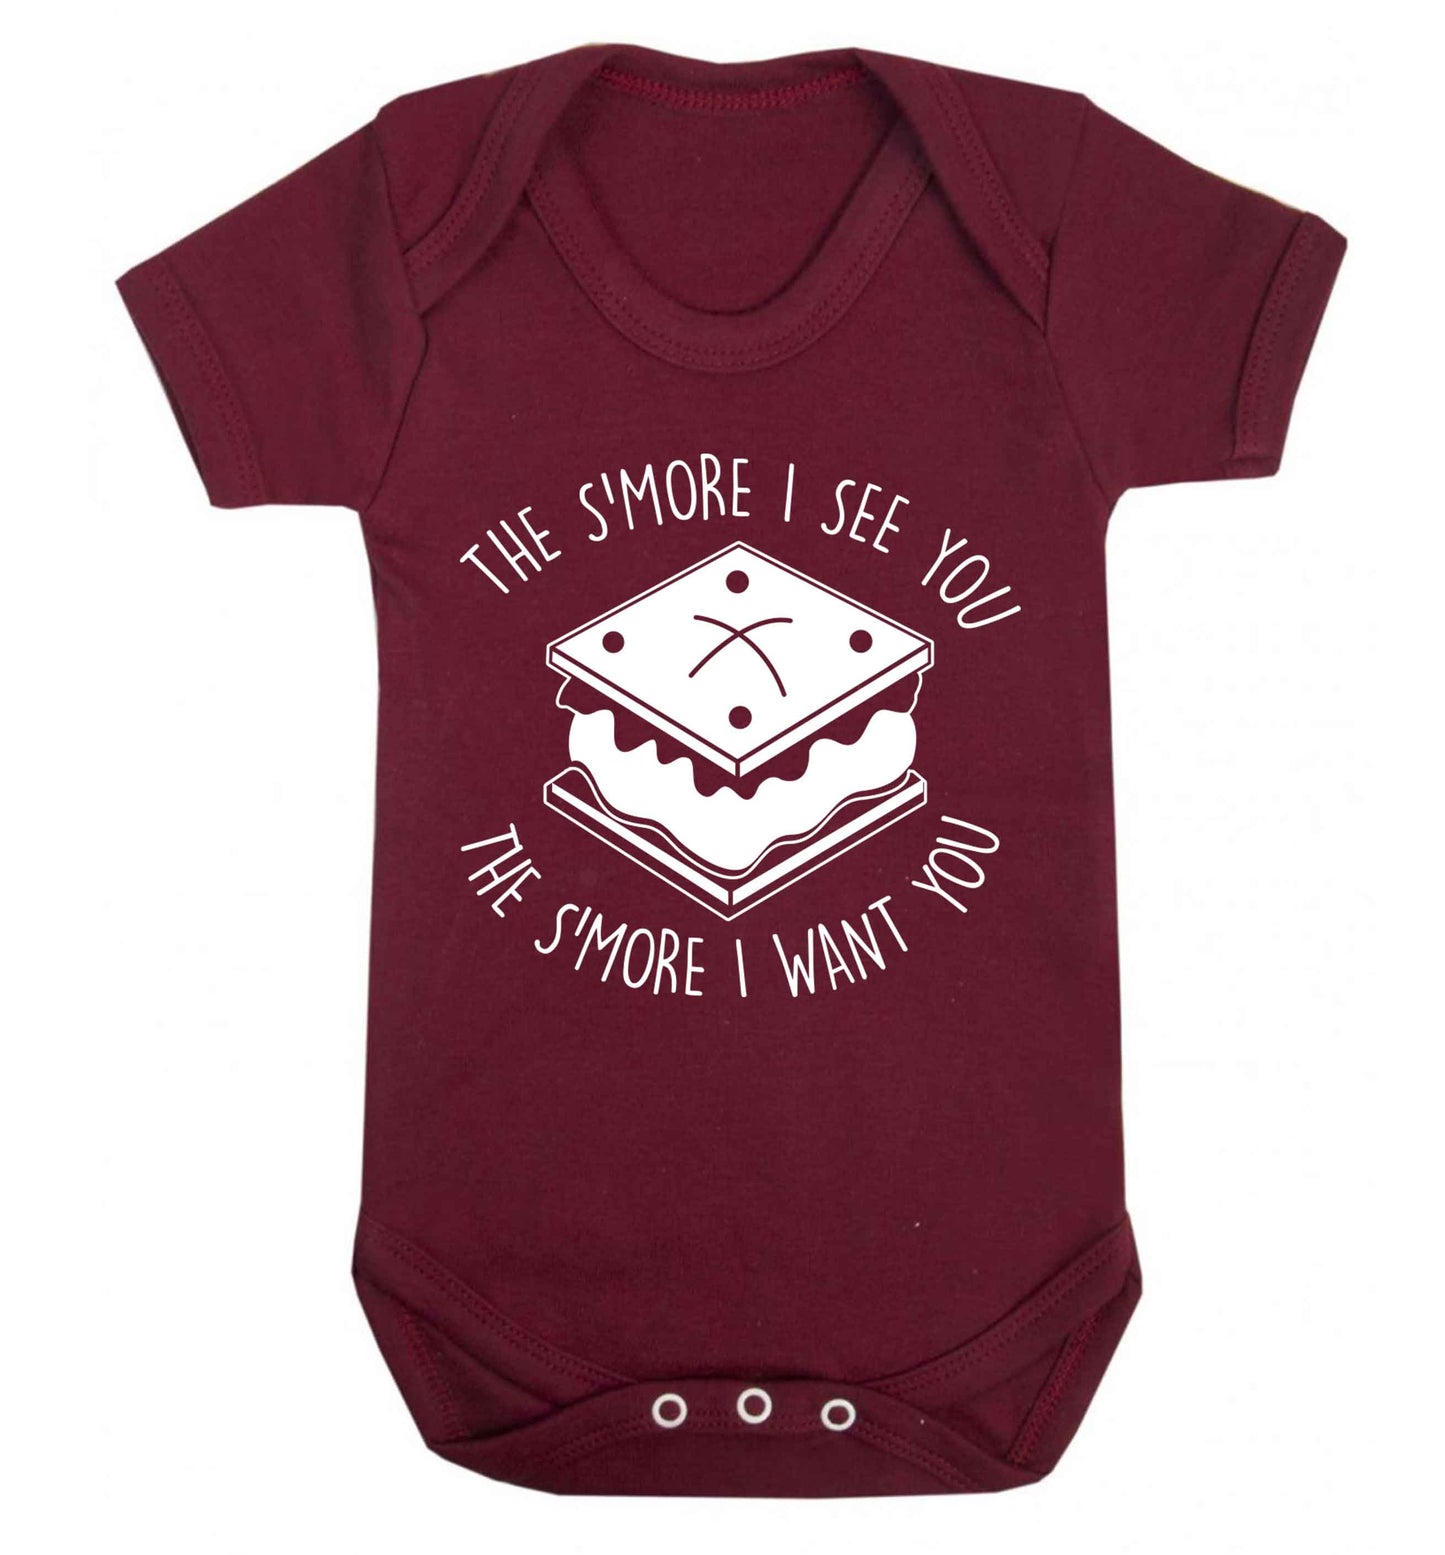 The s'more I see you the s'more I want you Baby Vest maroon 18-24 months